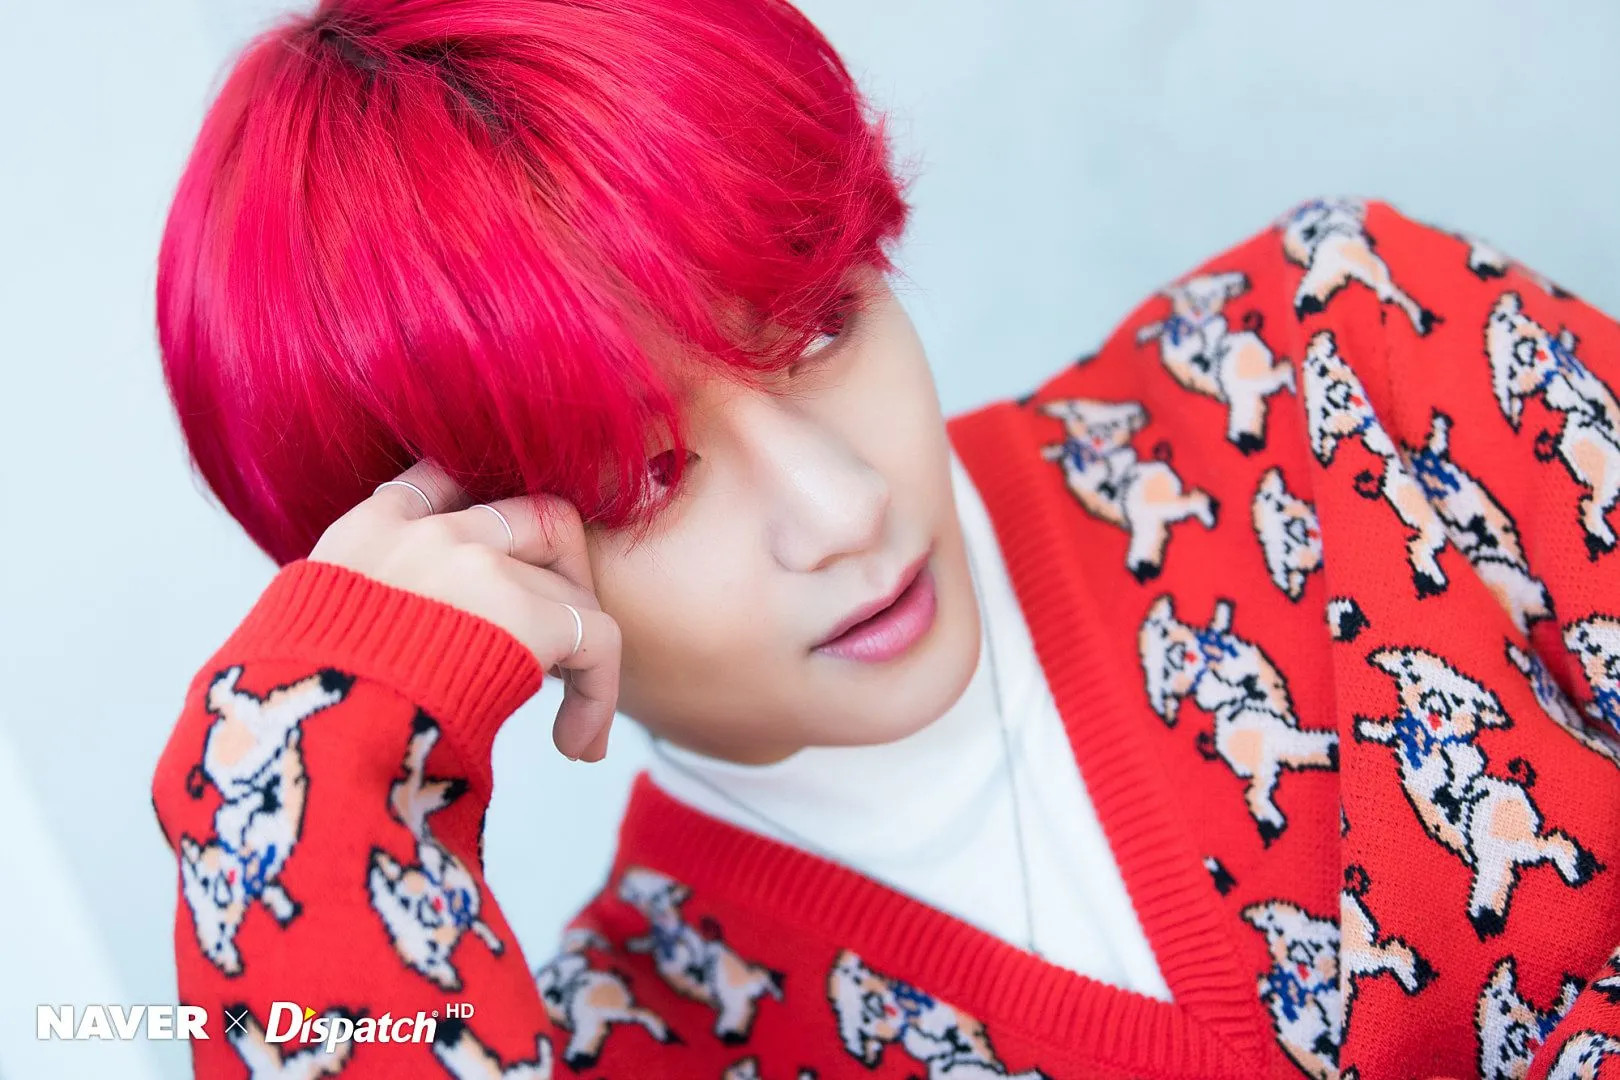 NAVER x DISPATCH BTS's V Christmas Picture